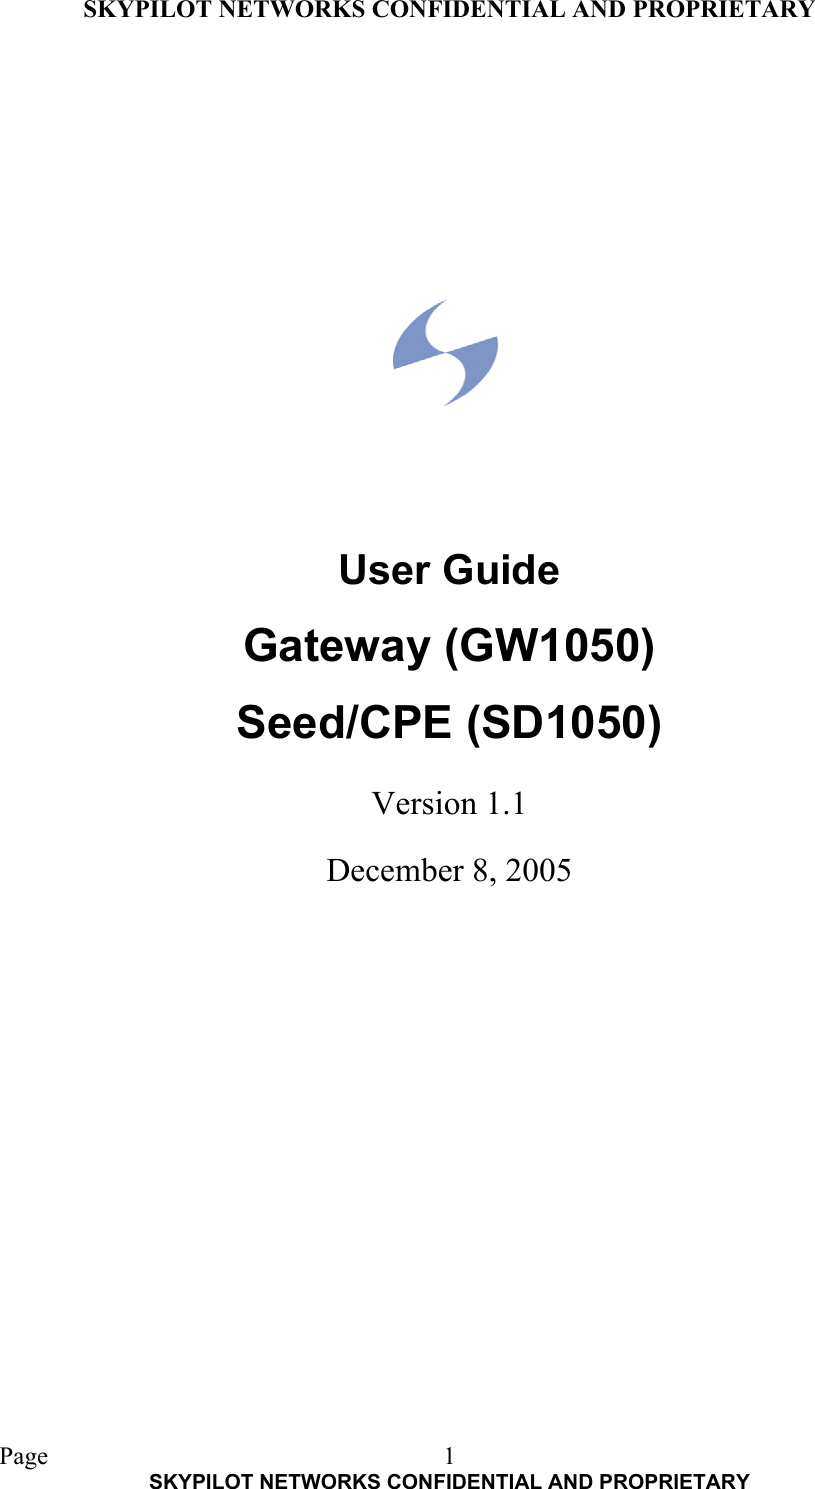 SKYPILOT NETWORKS CONFIDENTIAL AND PROPRIETARY  Page    SKYPILOT NETWORKS CONFIDENTIAL AND PROPRIETARY 1             User Guide Gateway (GW1050) Seed/CPE (SD1050)  Version 1.1  December 8, 2005  